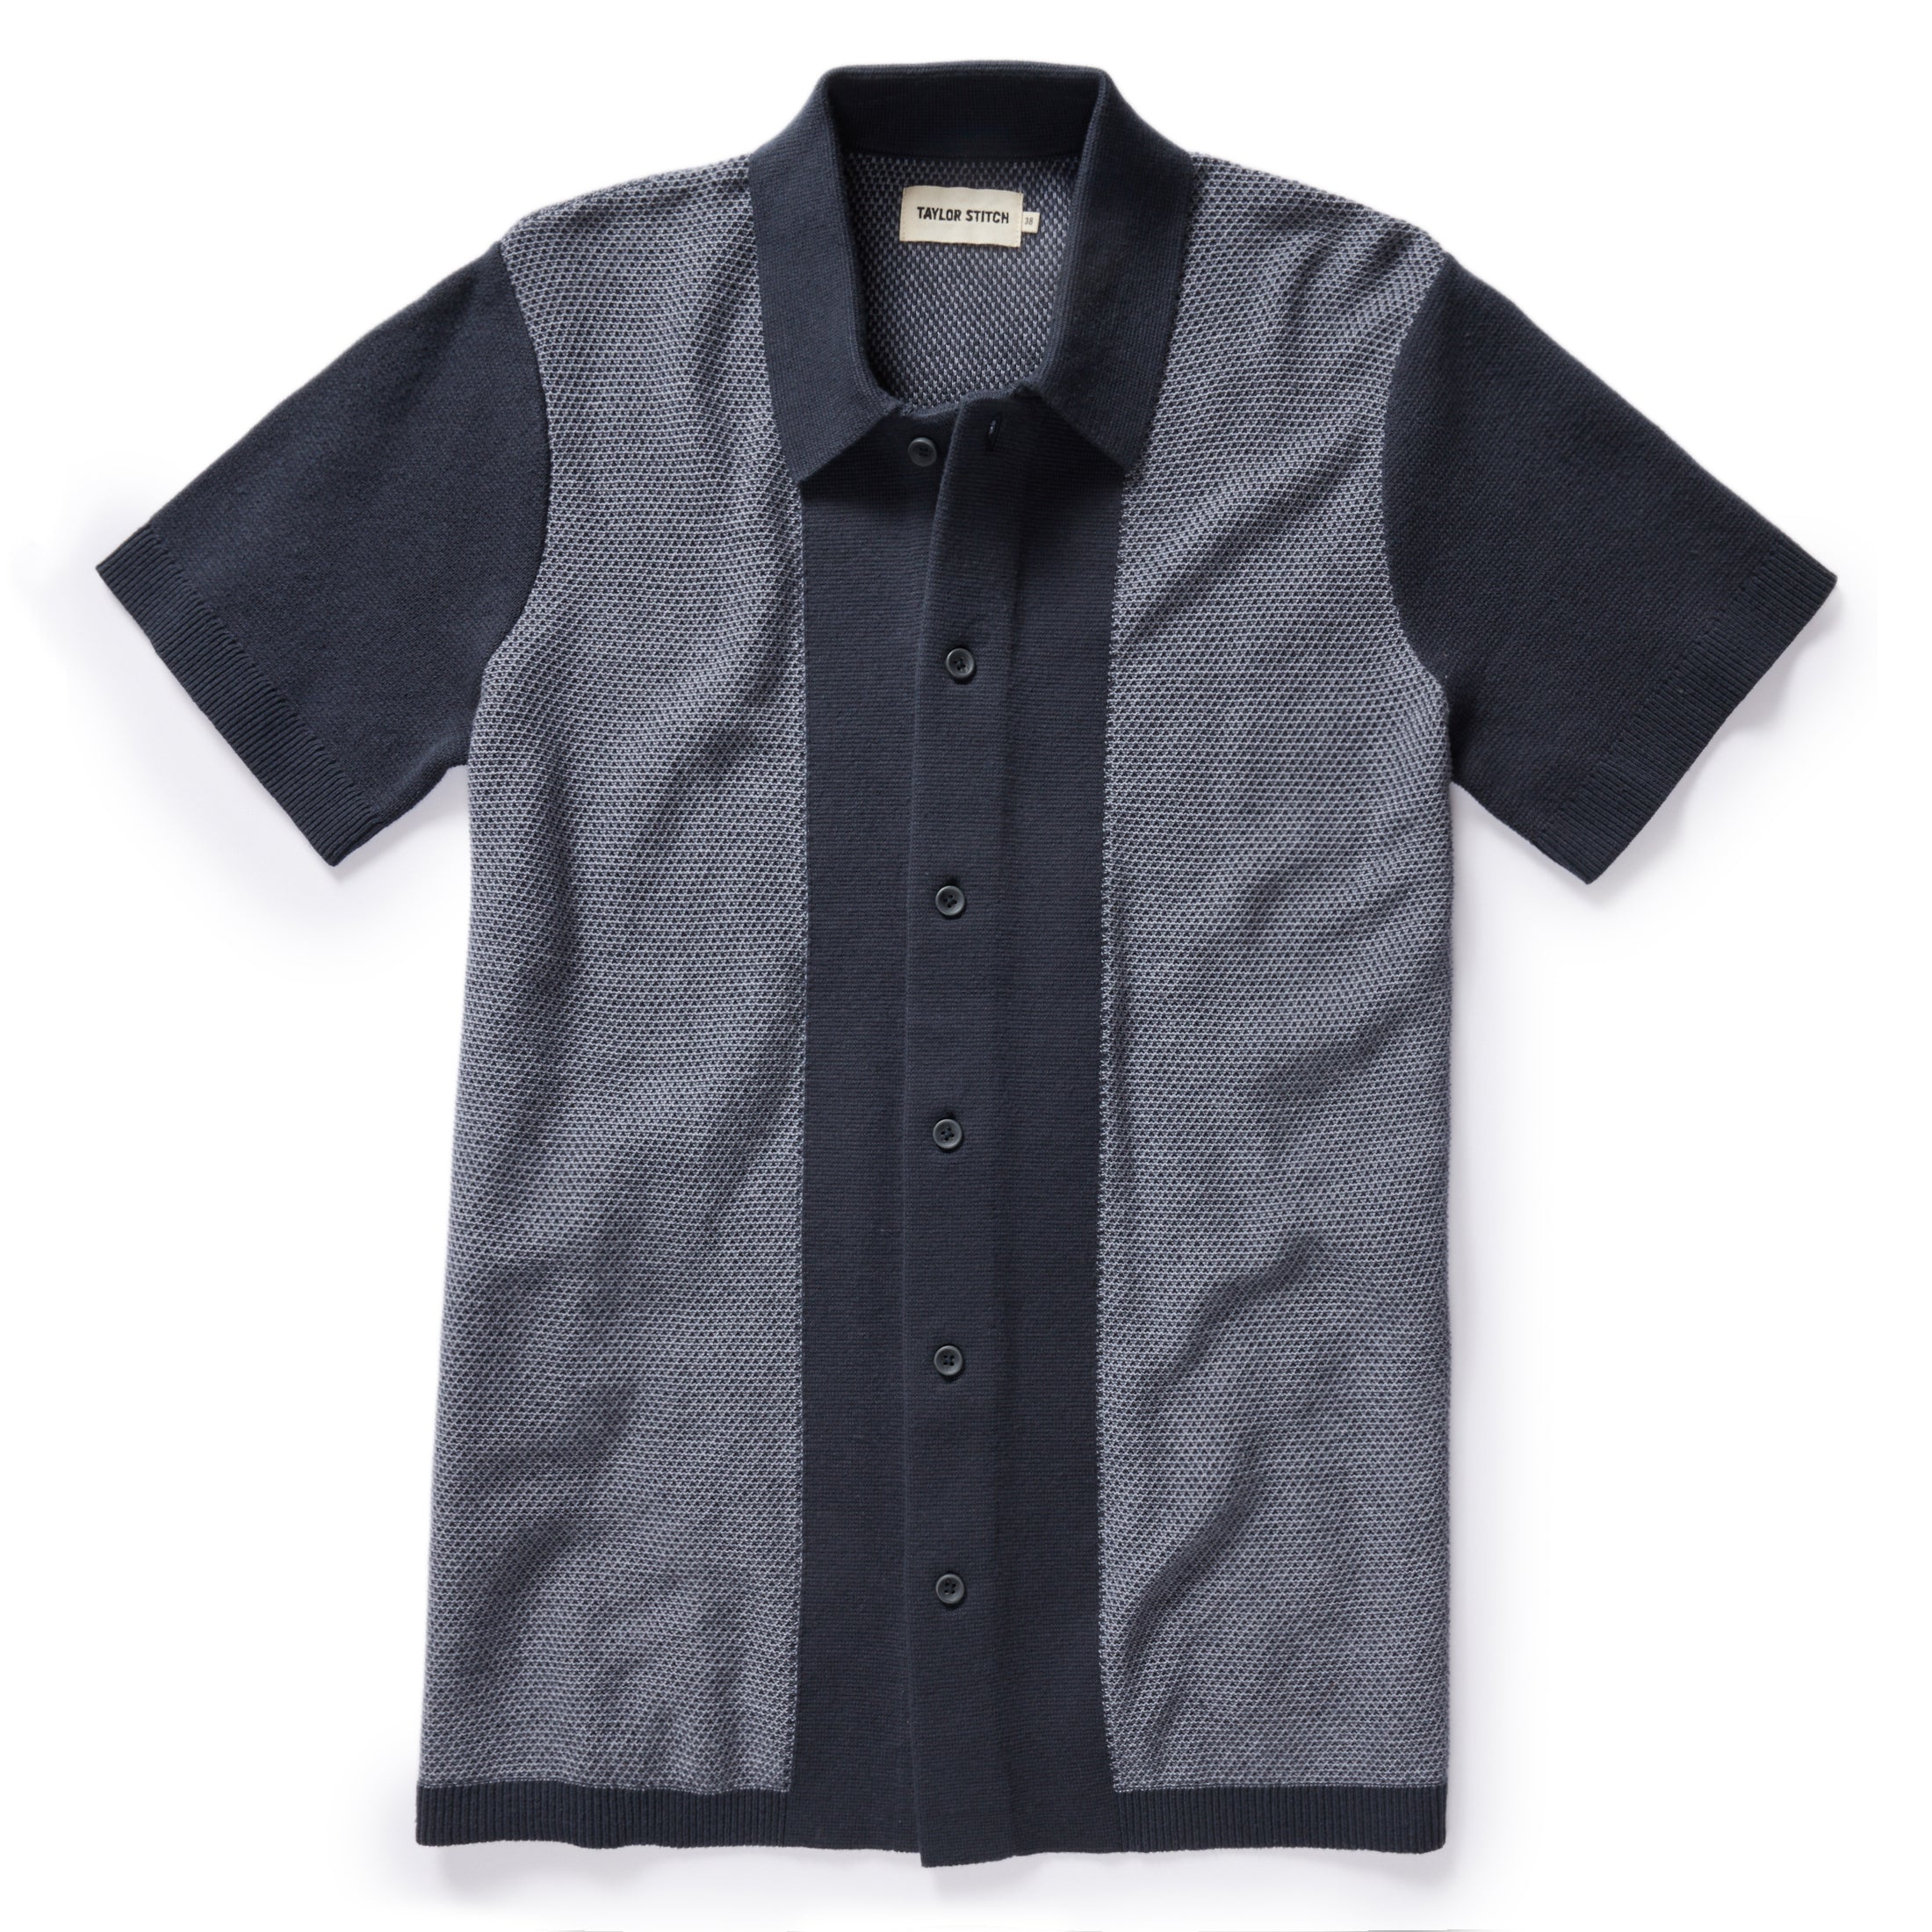 The Button Down Polo in Marine Seed Stitch Marine